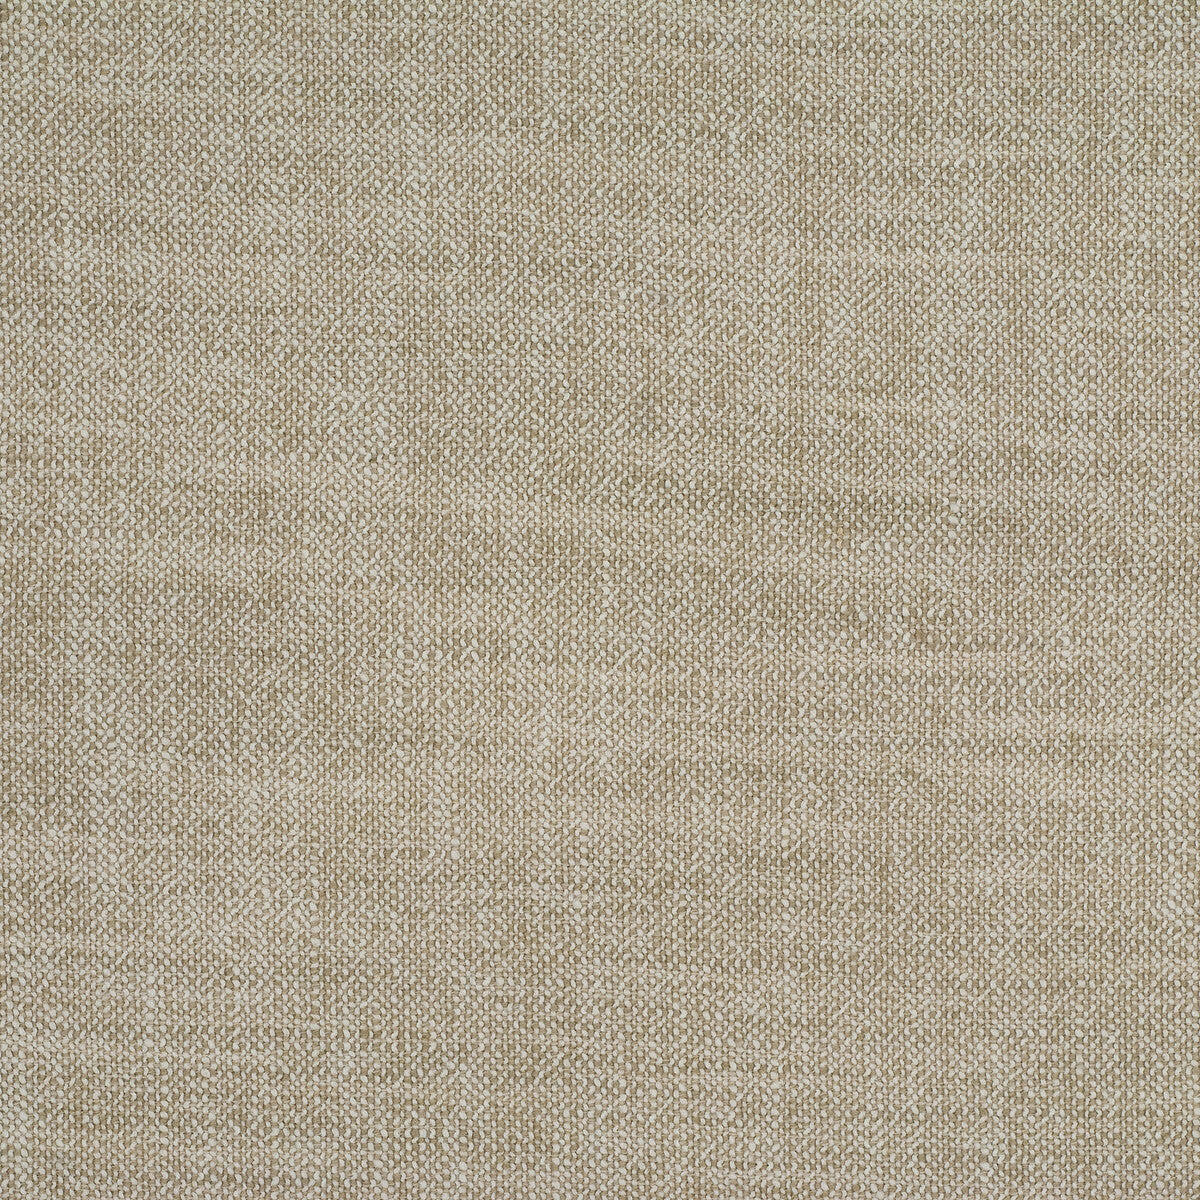 Elodie Texture fabric in beige color - pattern 8017143.16.0 - by Brunschwig &amp; Fils